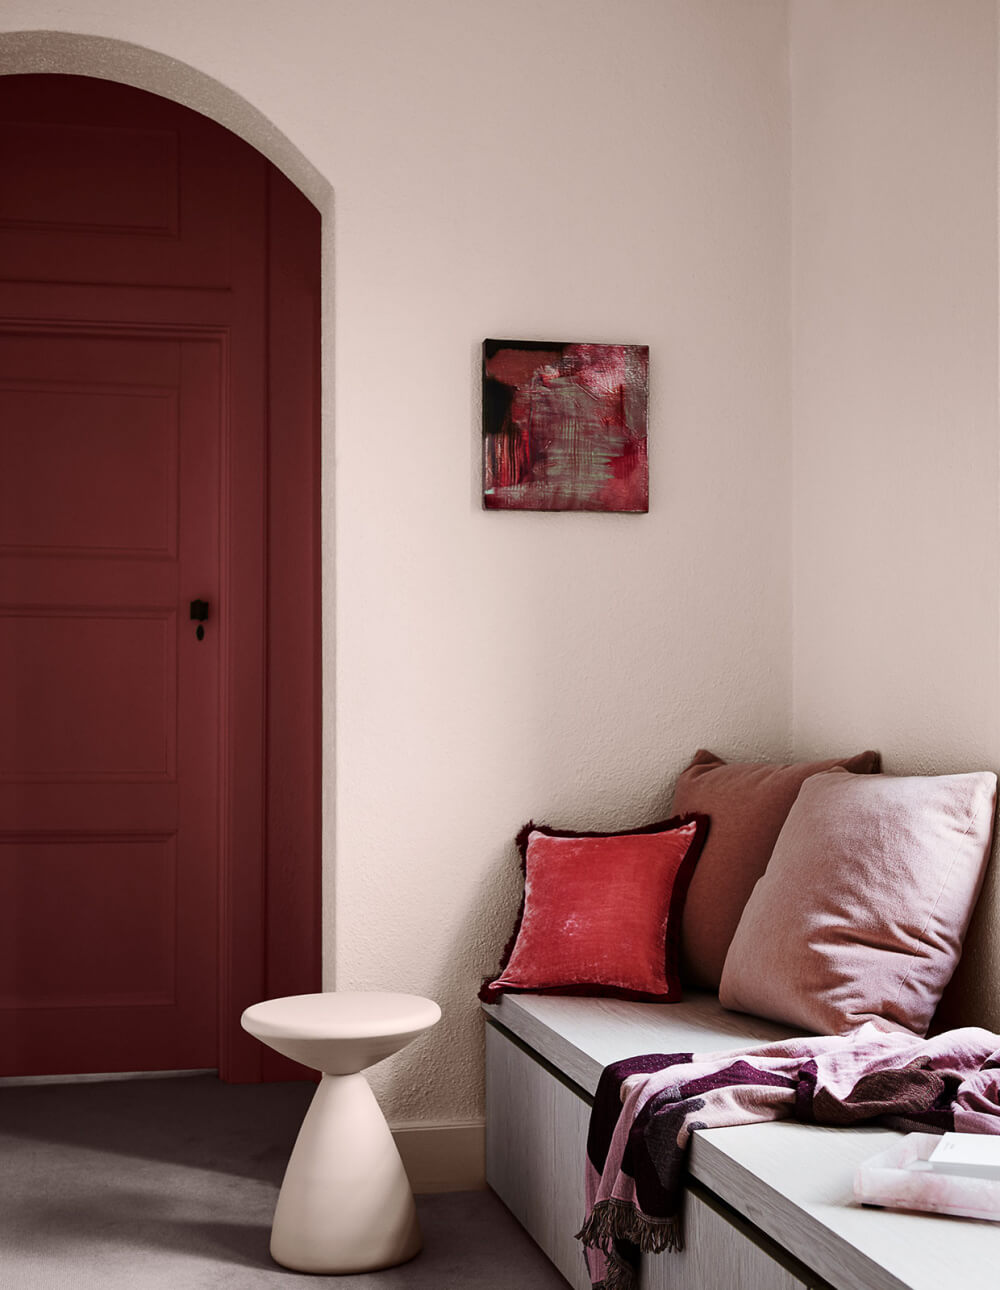 TheNordroom DuluxColorForecast2020 11 The Color Trends For 2020 Are Inspired by Nature